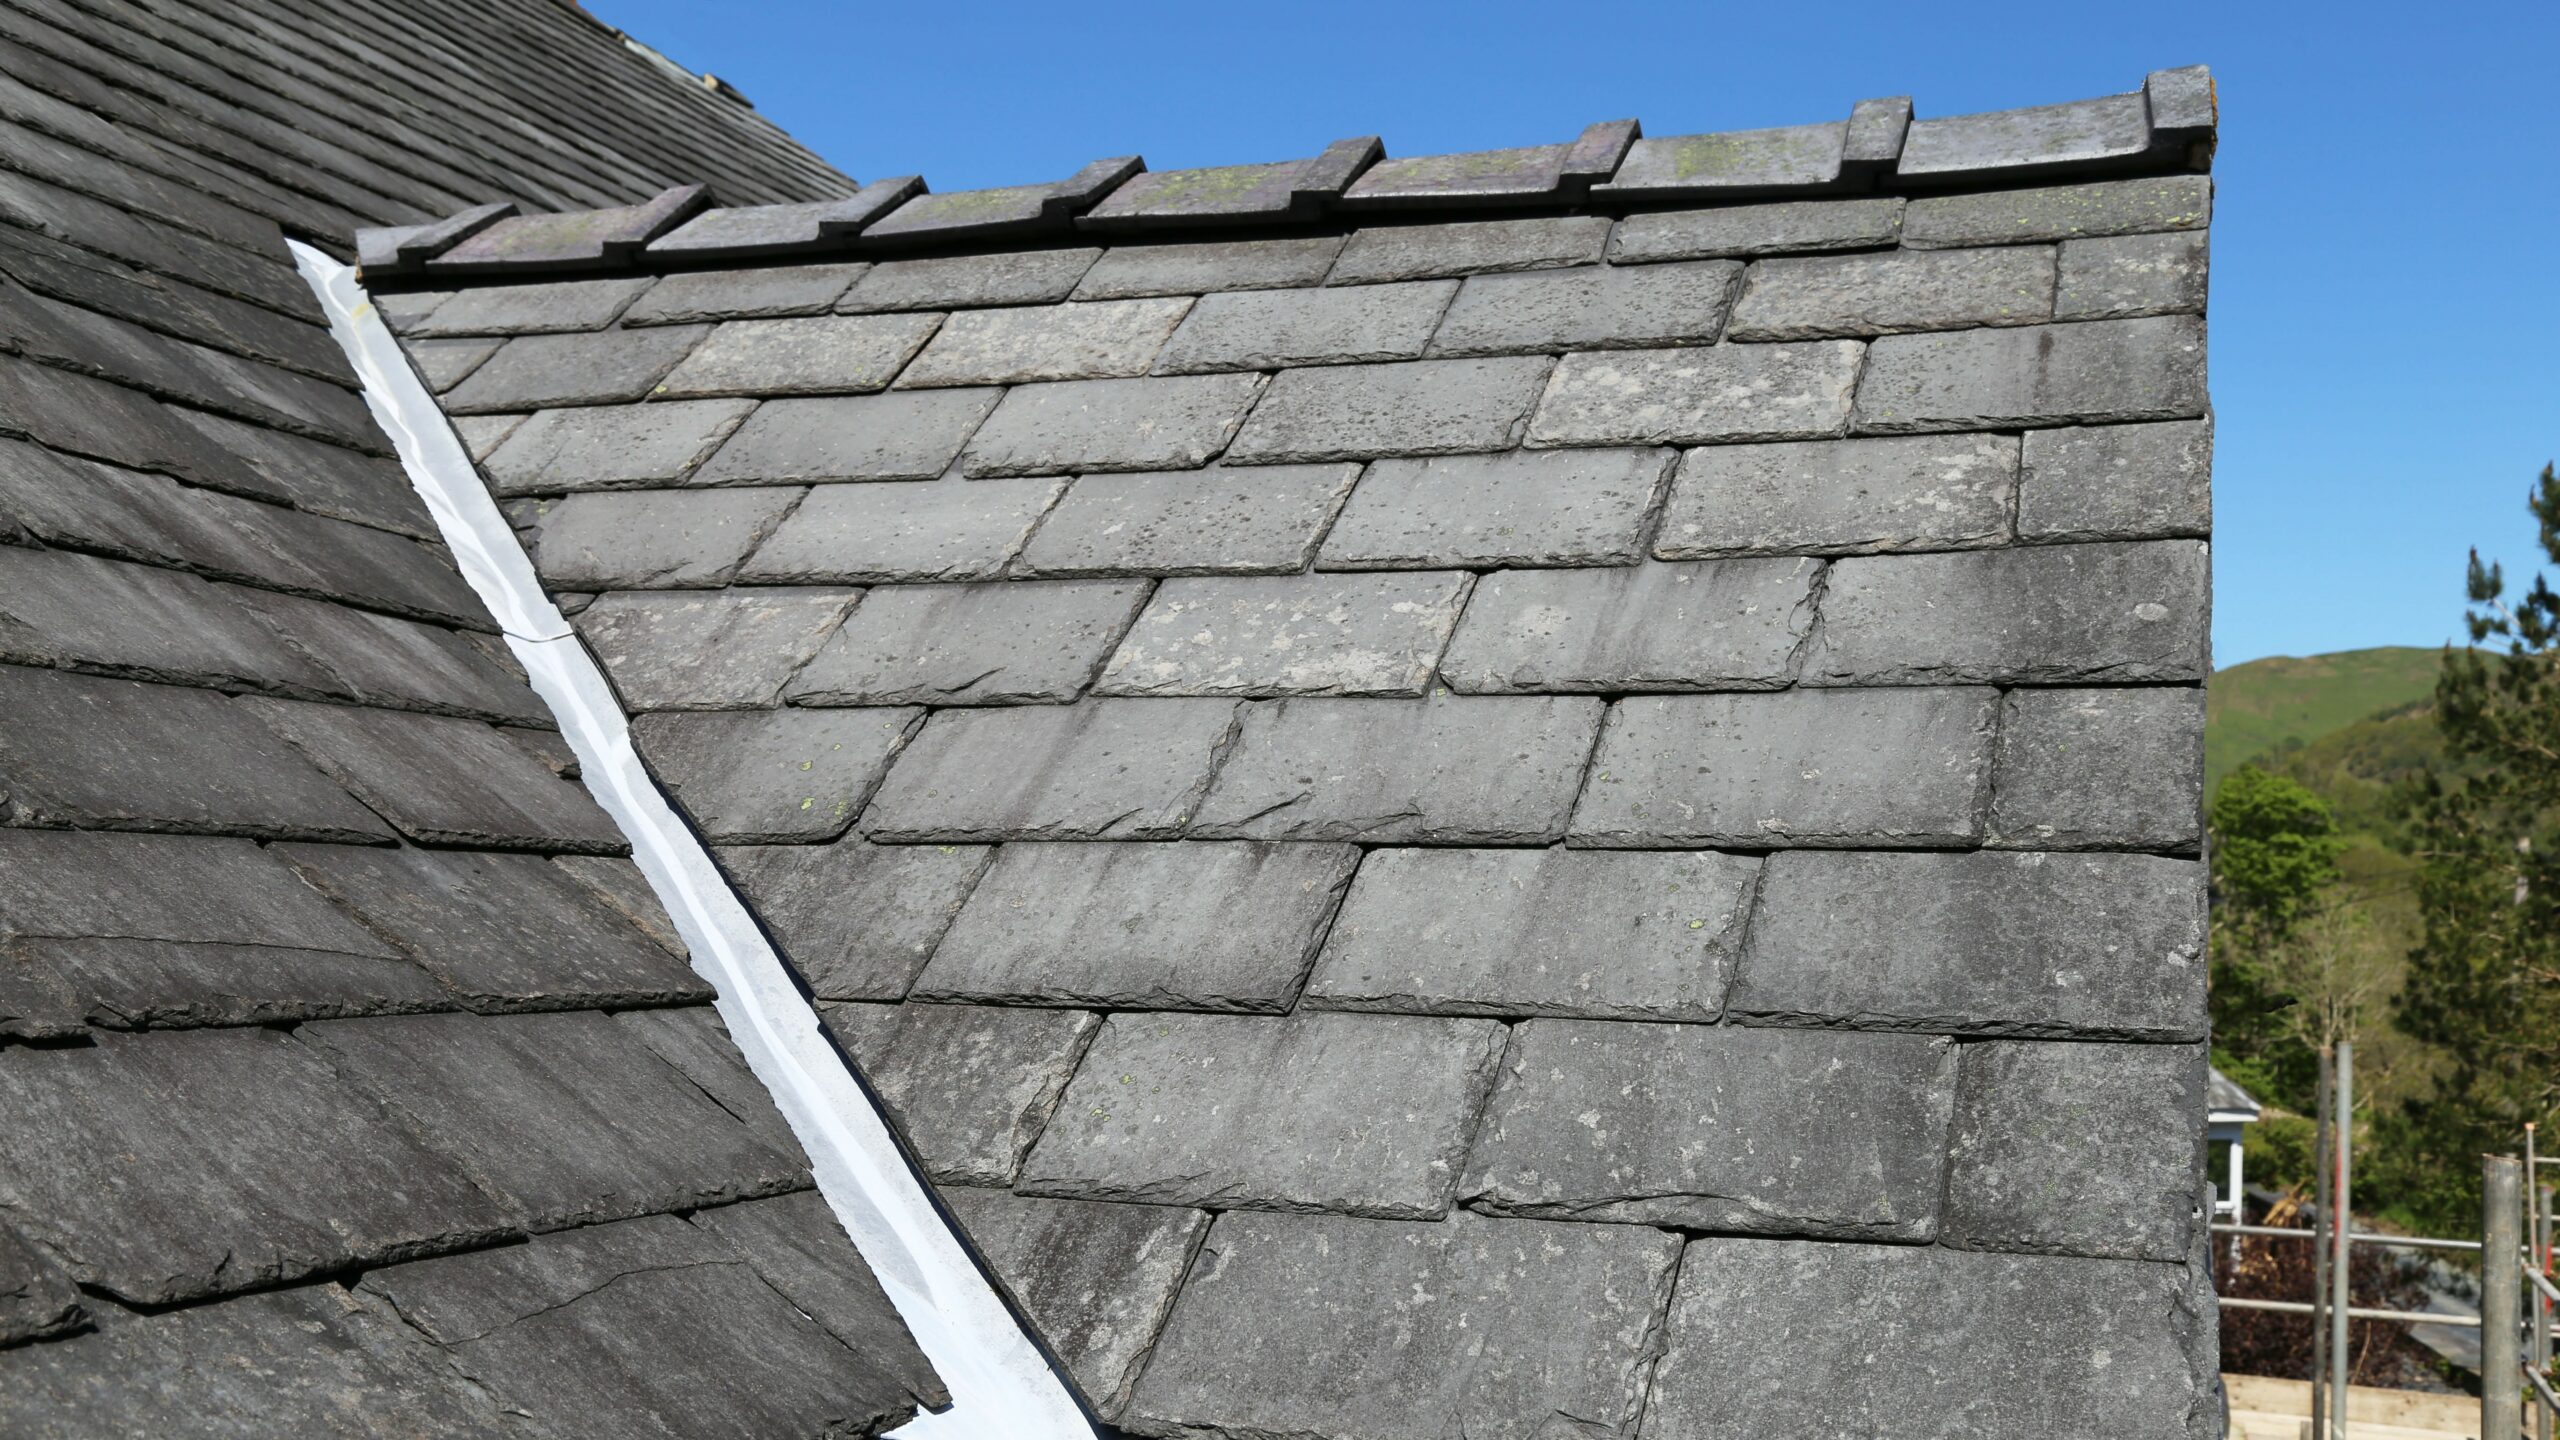 Residential roofing with slate tiles